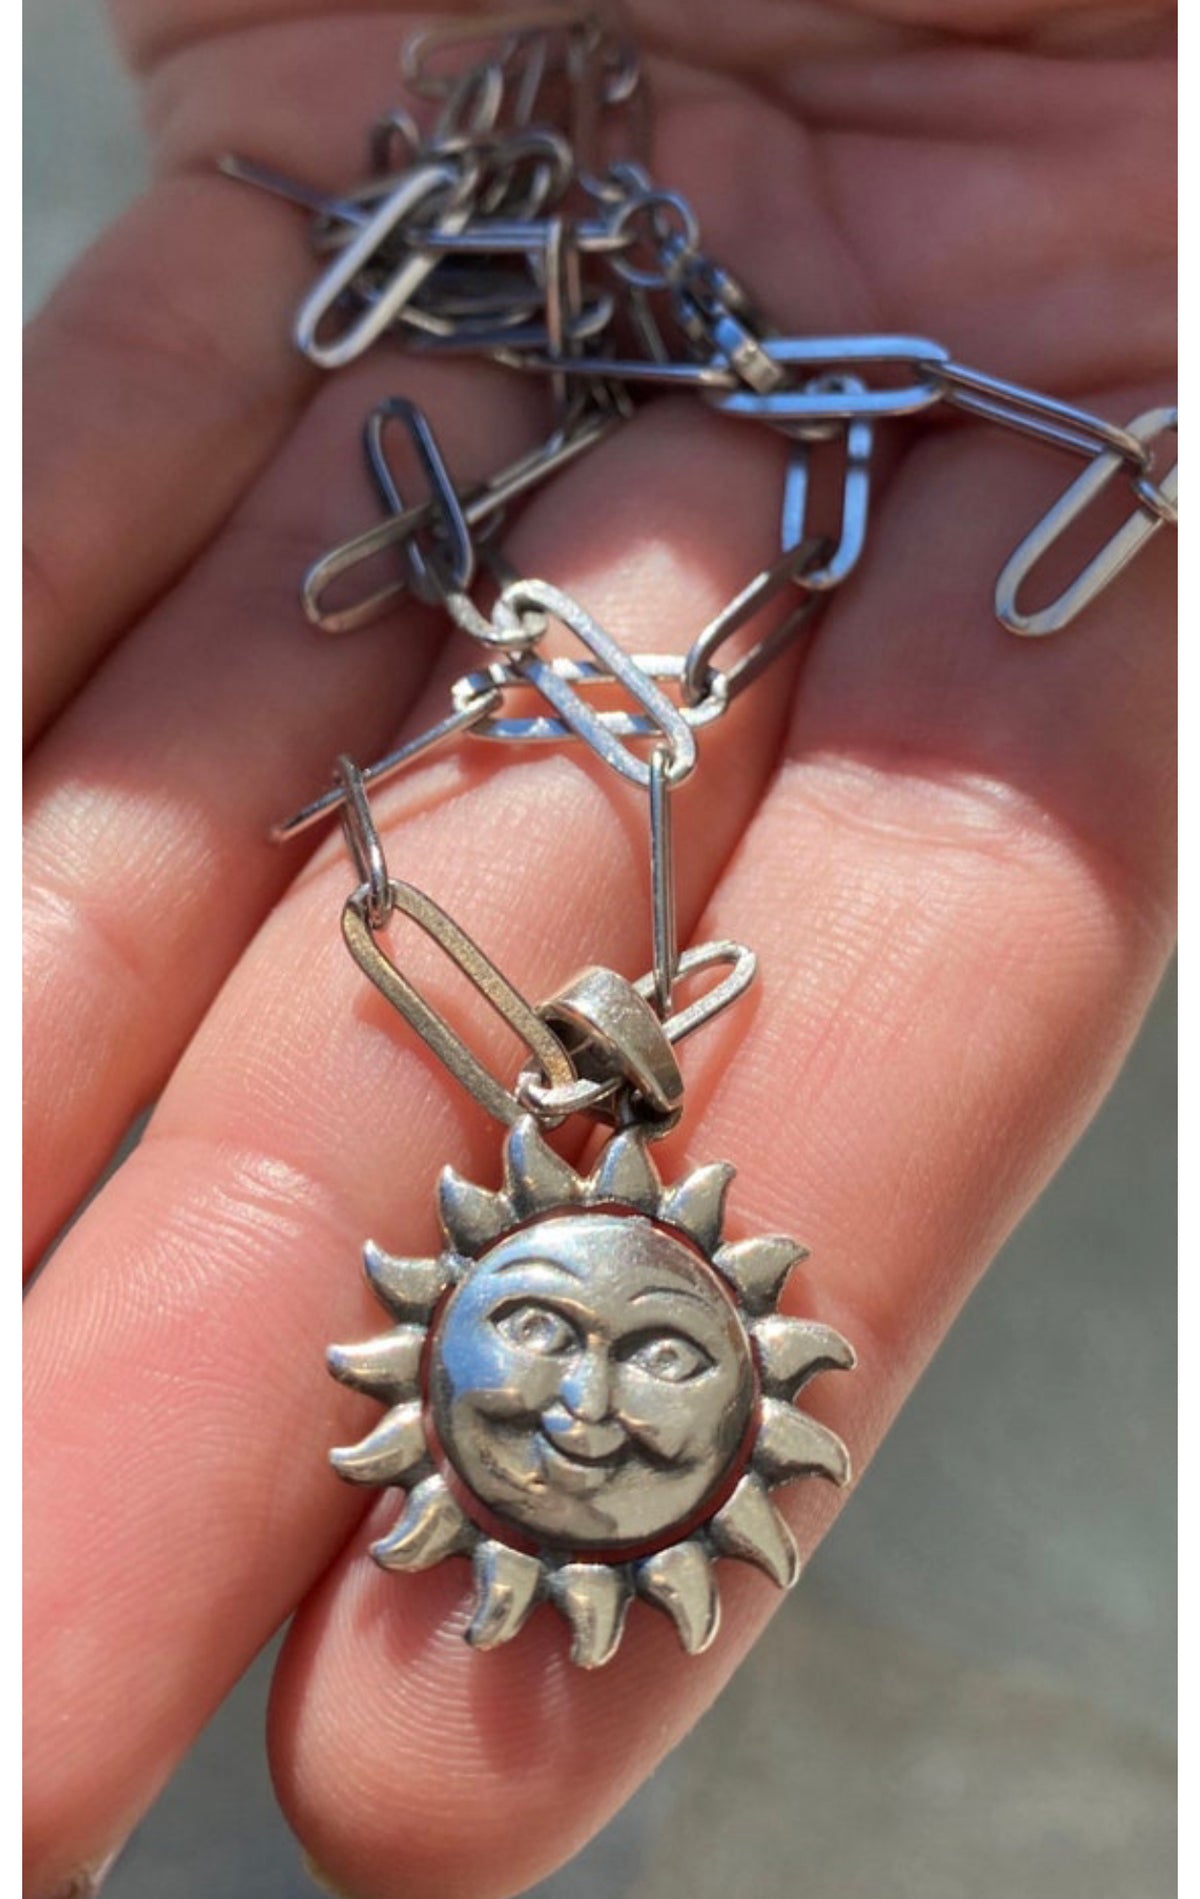 Sterling silver smiling sun paperclip chain